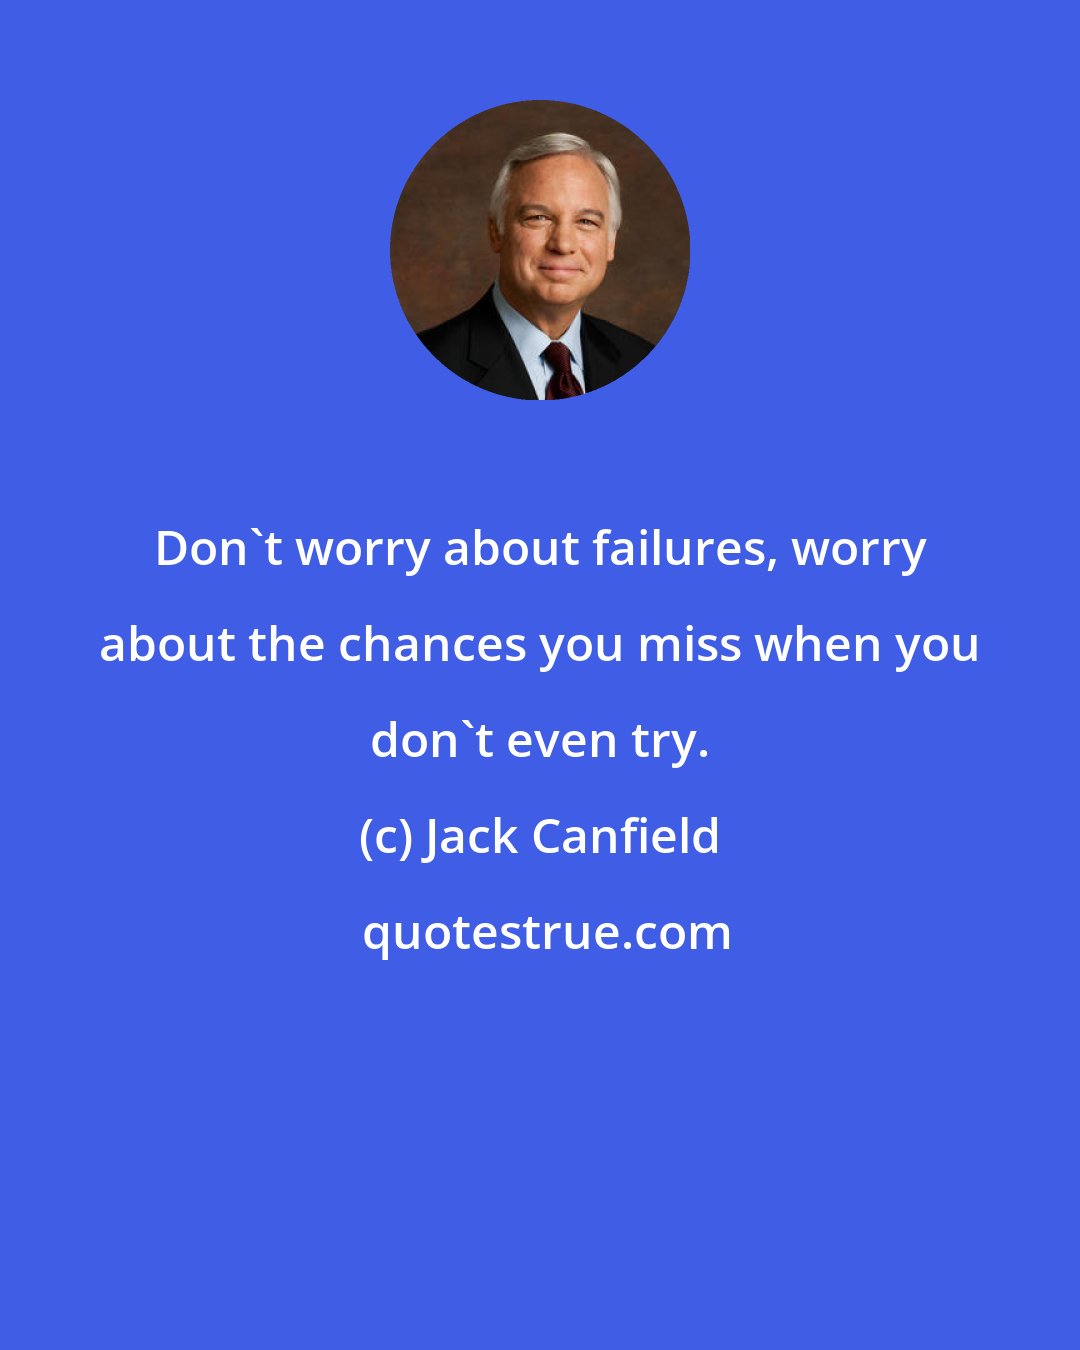 Jack Canfield: Don't worry about failures, worry about the chances you miss when you don't even try.